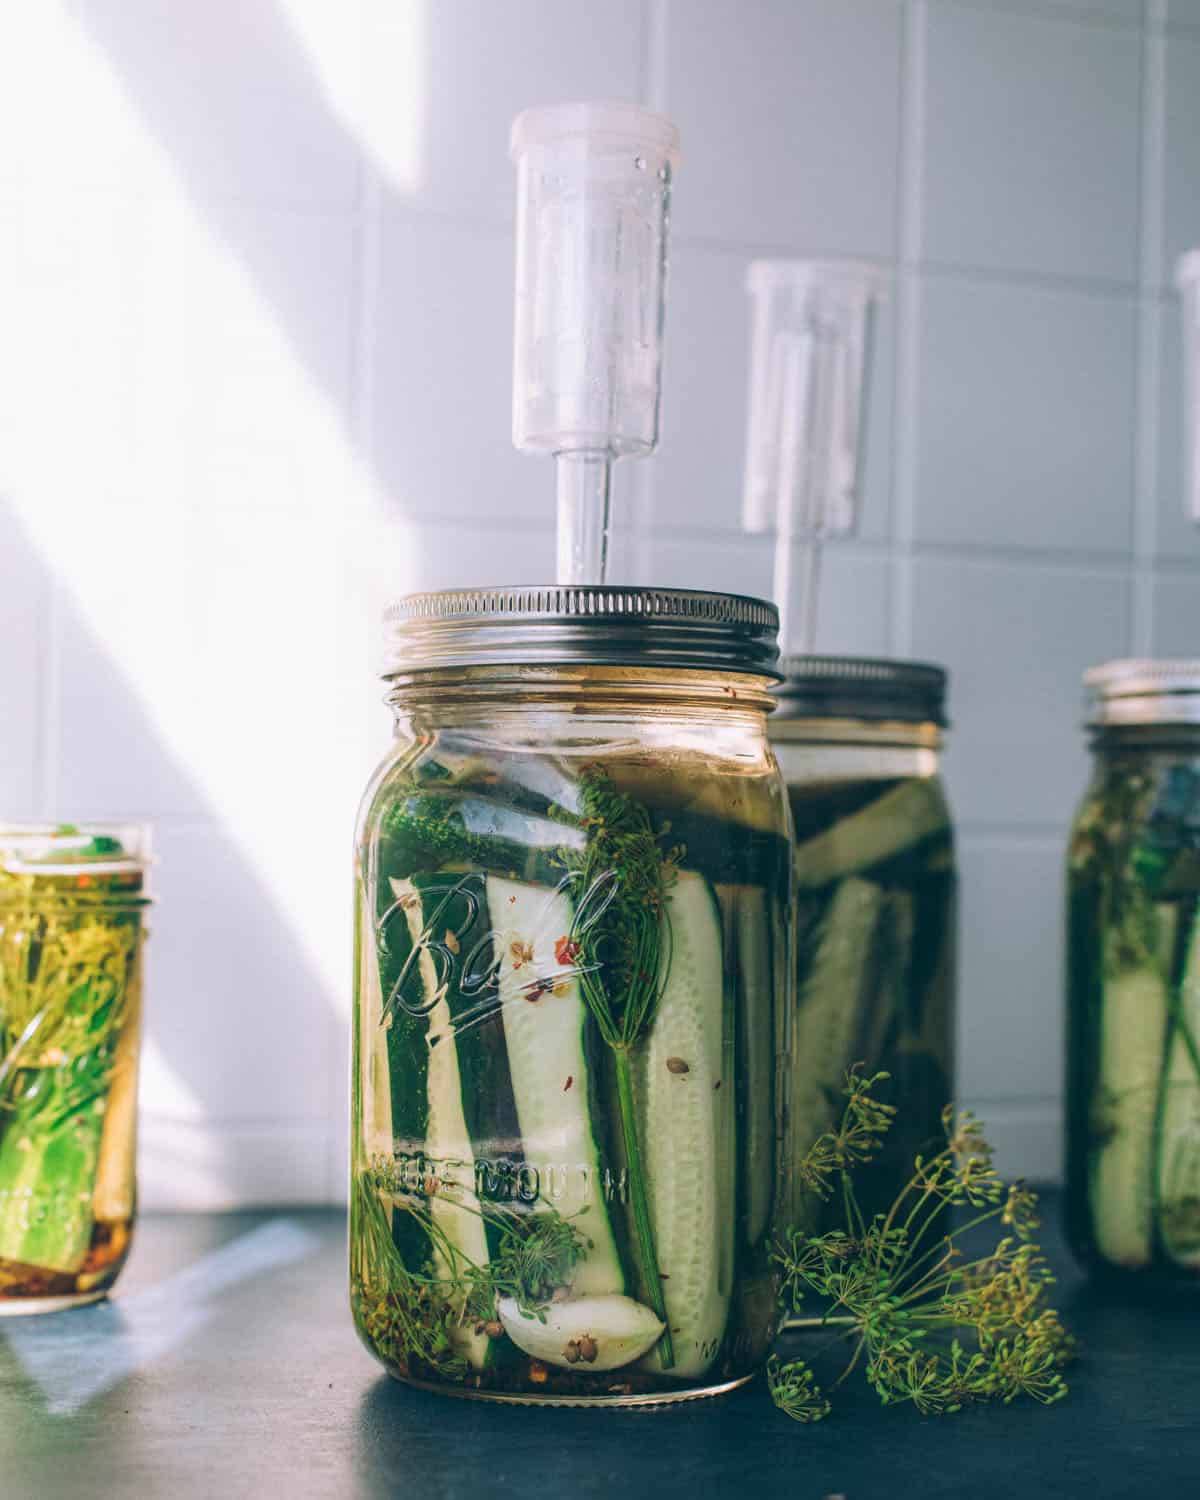 Pickling cucumbers fermenting in jars with airlock lids. 